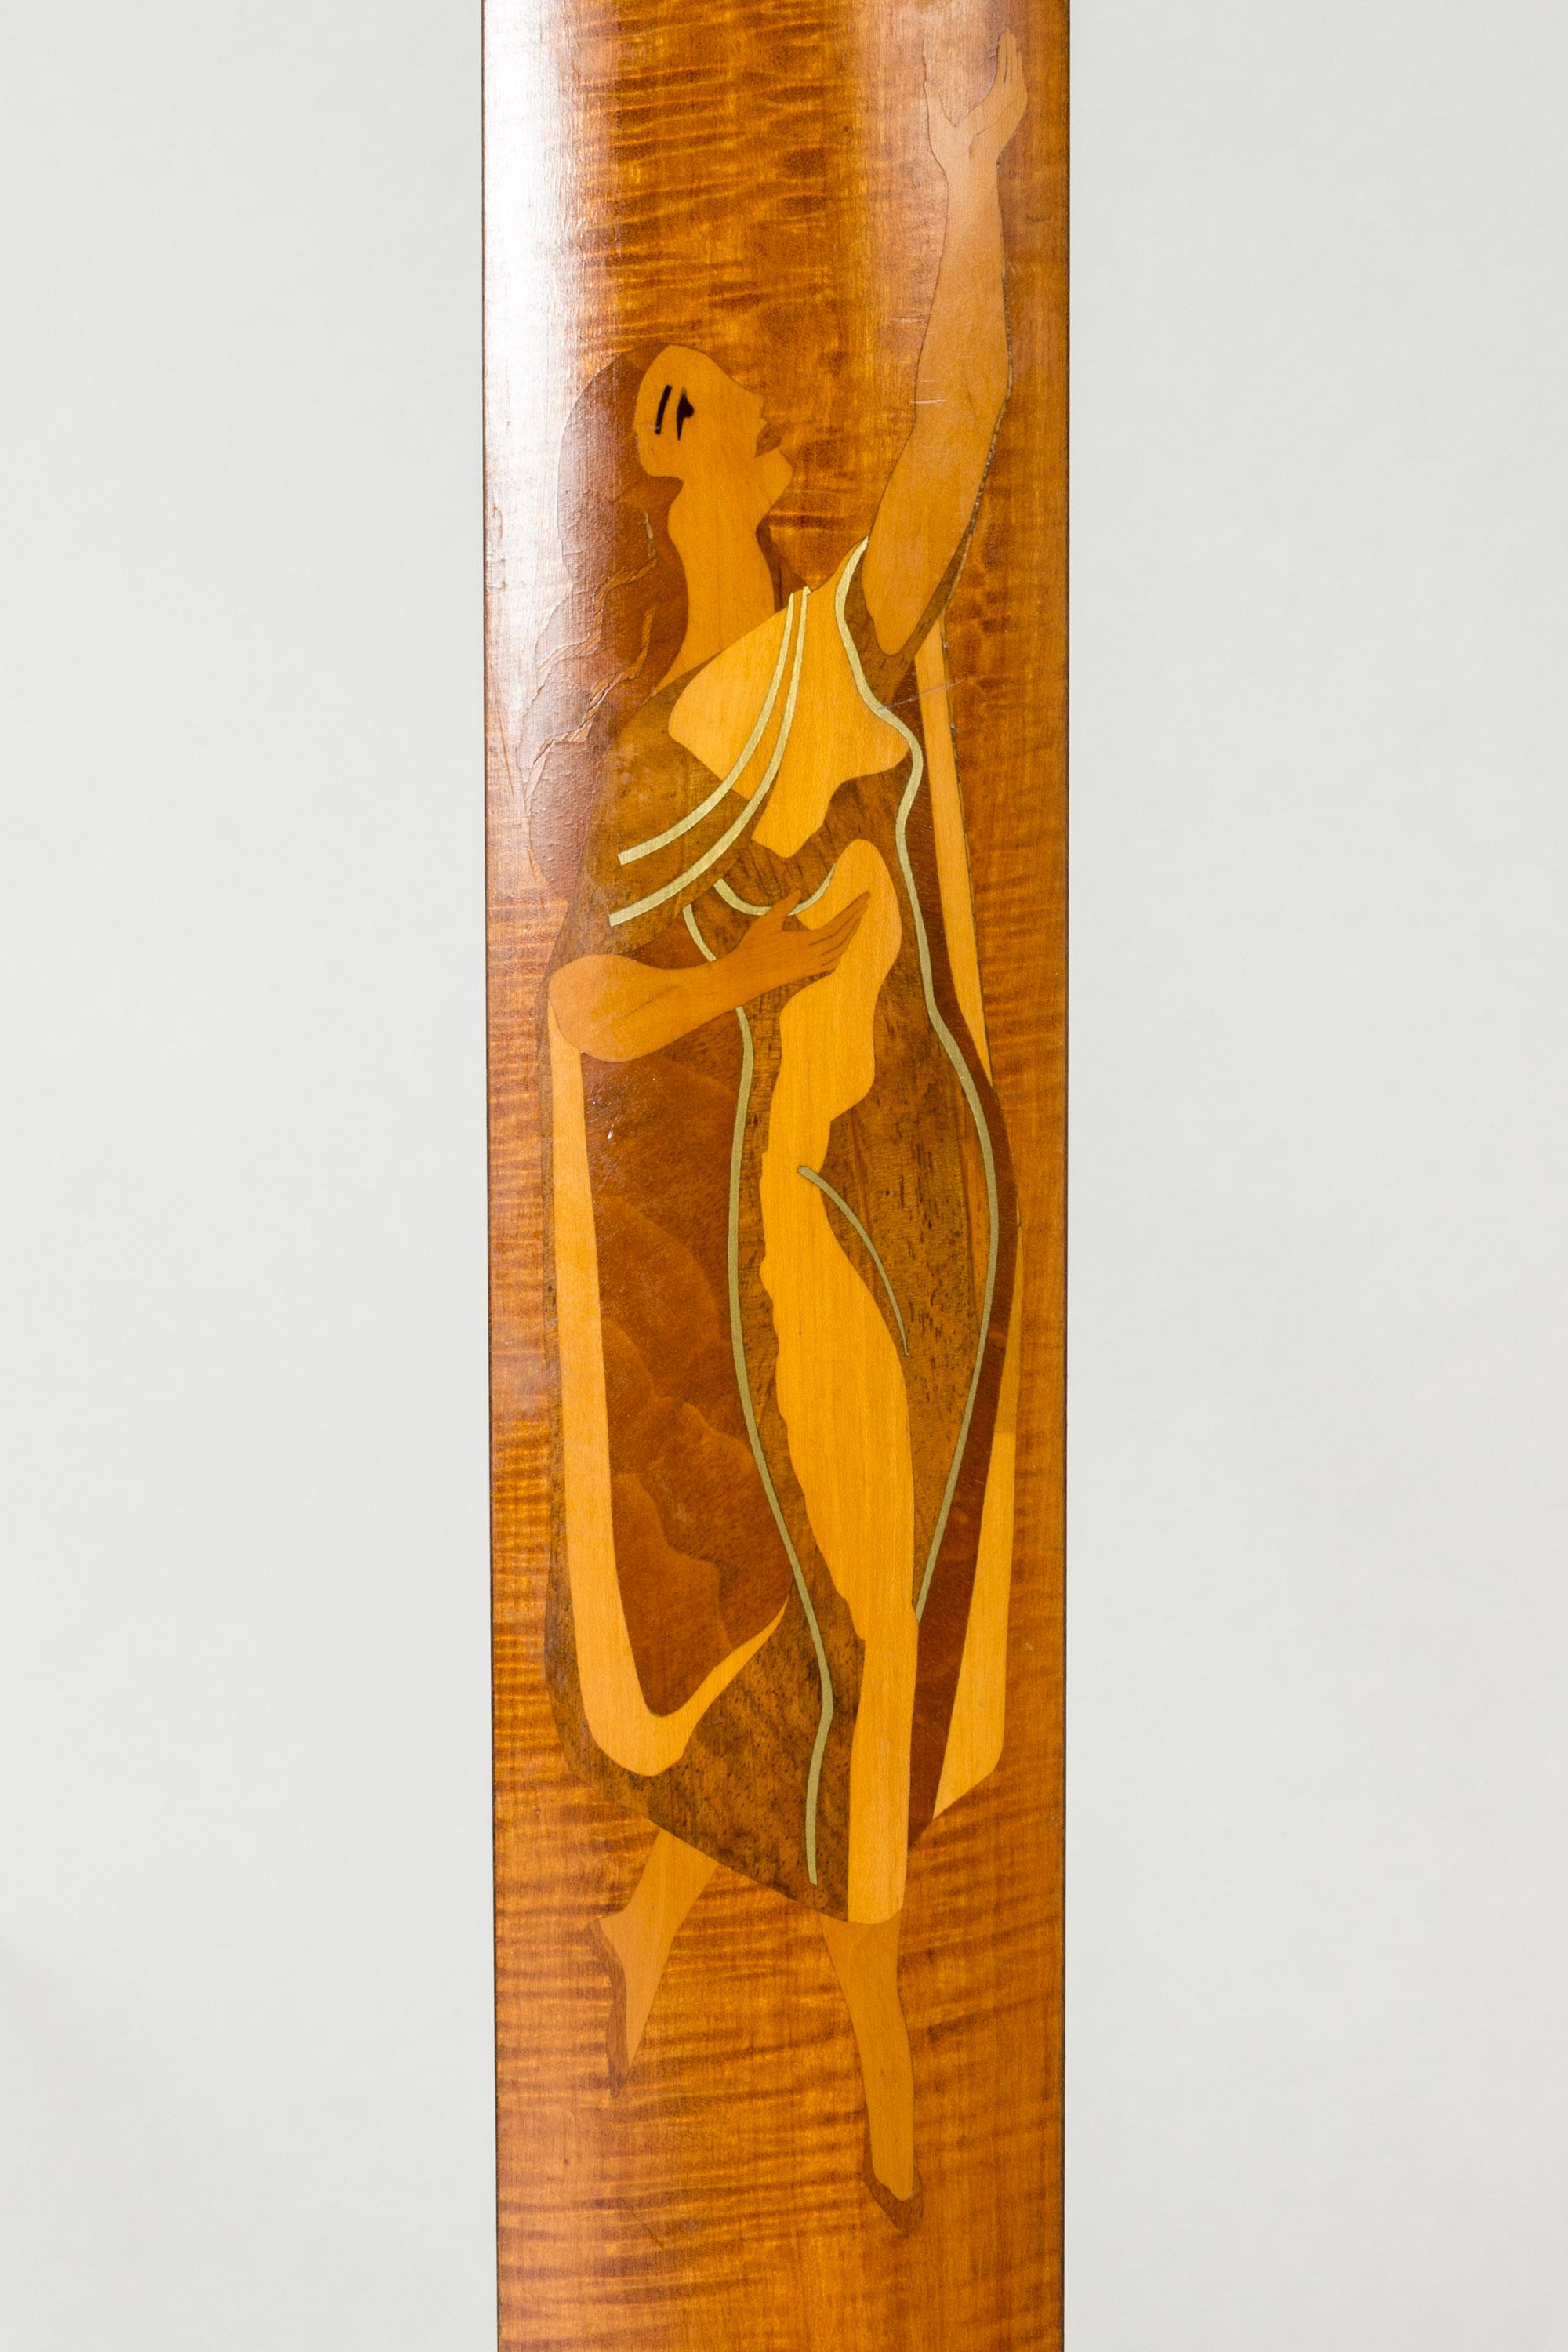 Wood Swedish Modern floor lamp with inlays, Mjölby Intarsia, Sweden, 1930s For Sale